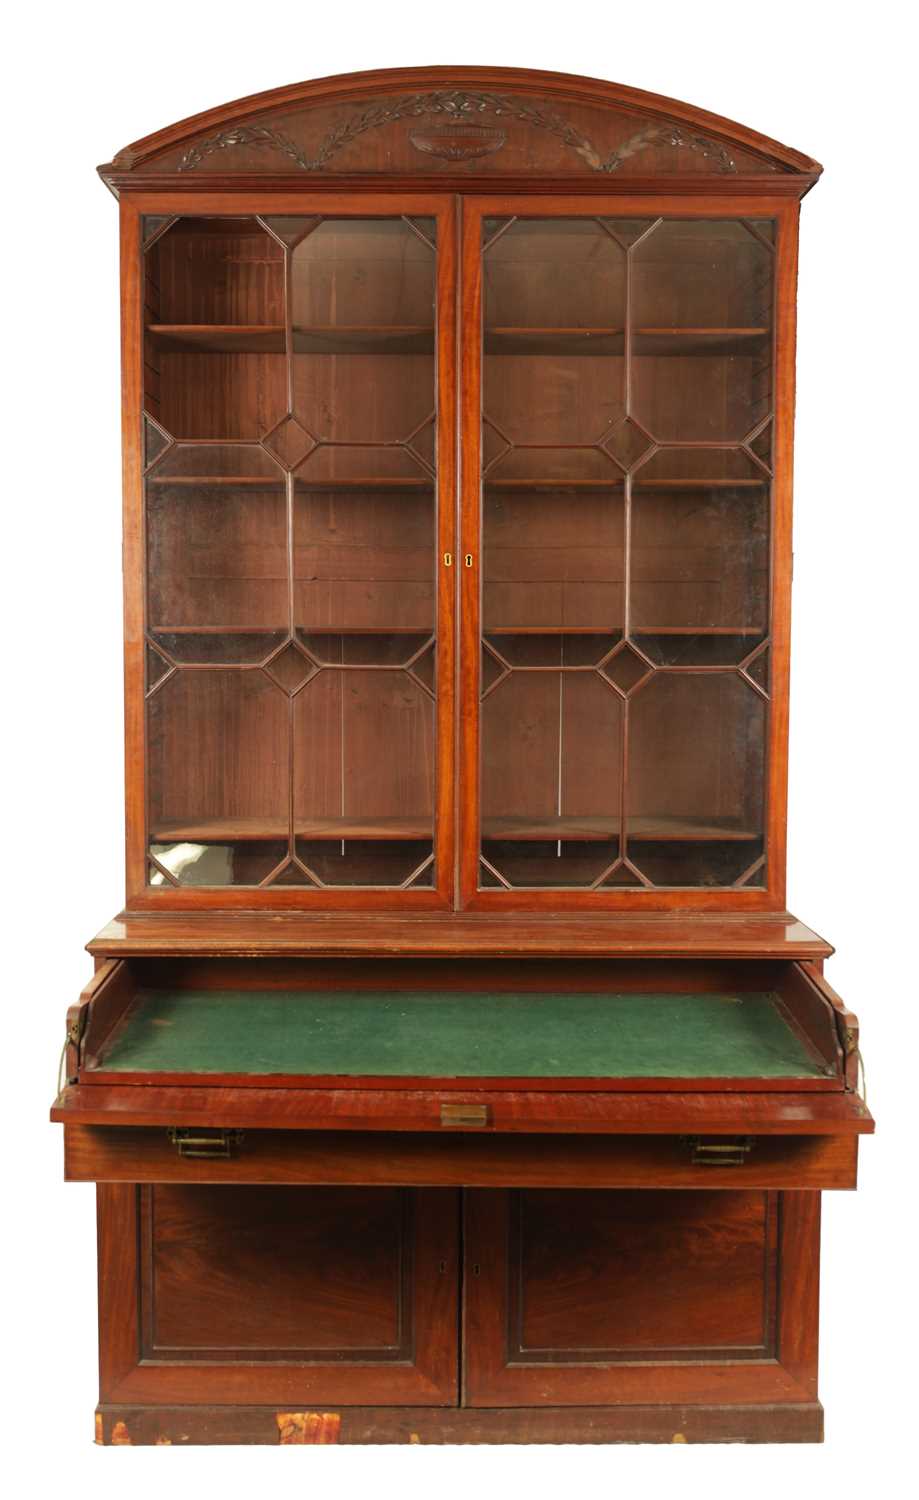 A GOOD MID 18TH CENTURY COUNTRY HOUSE MAHOGANY SECRETAIRE BOOKCASE IN THE MANOR OF GILLOWS - Image 2 of 14